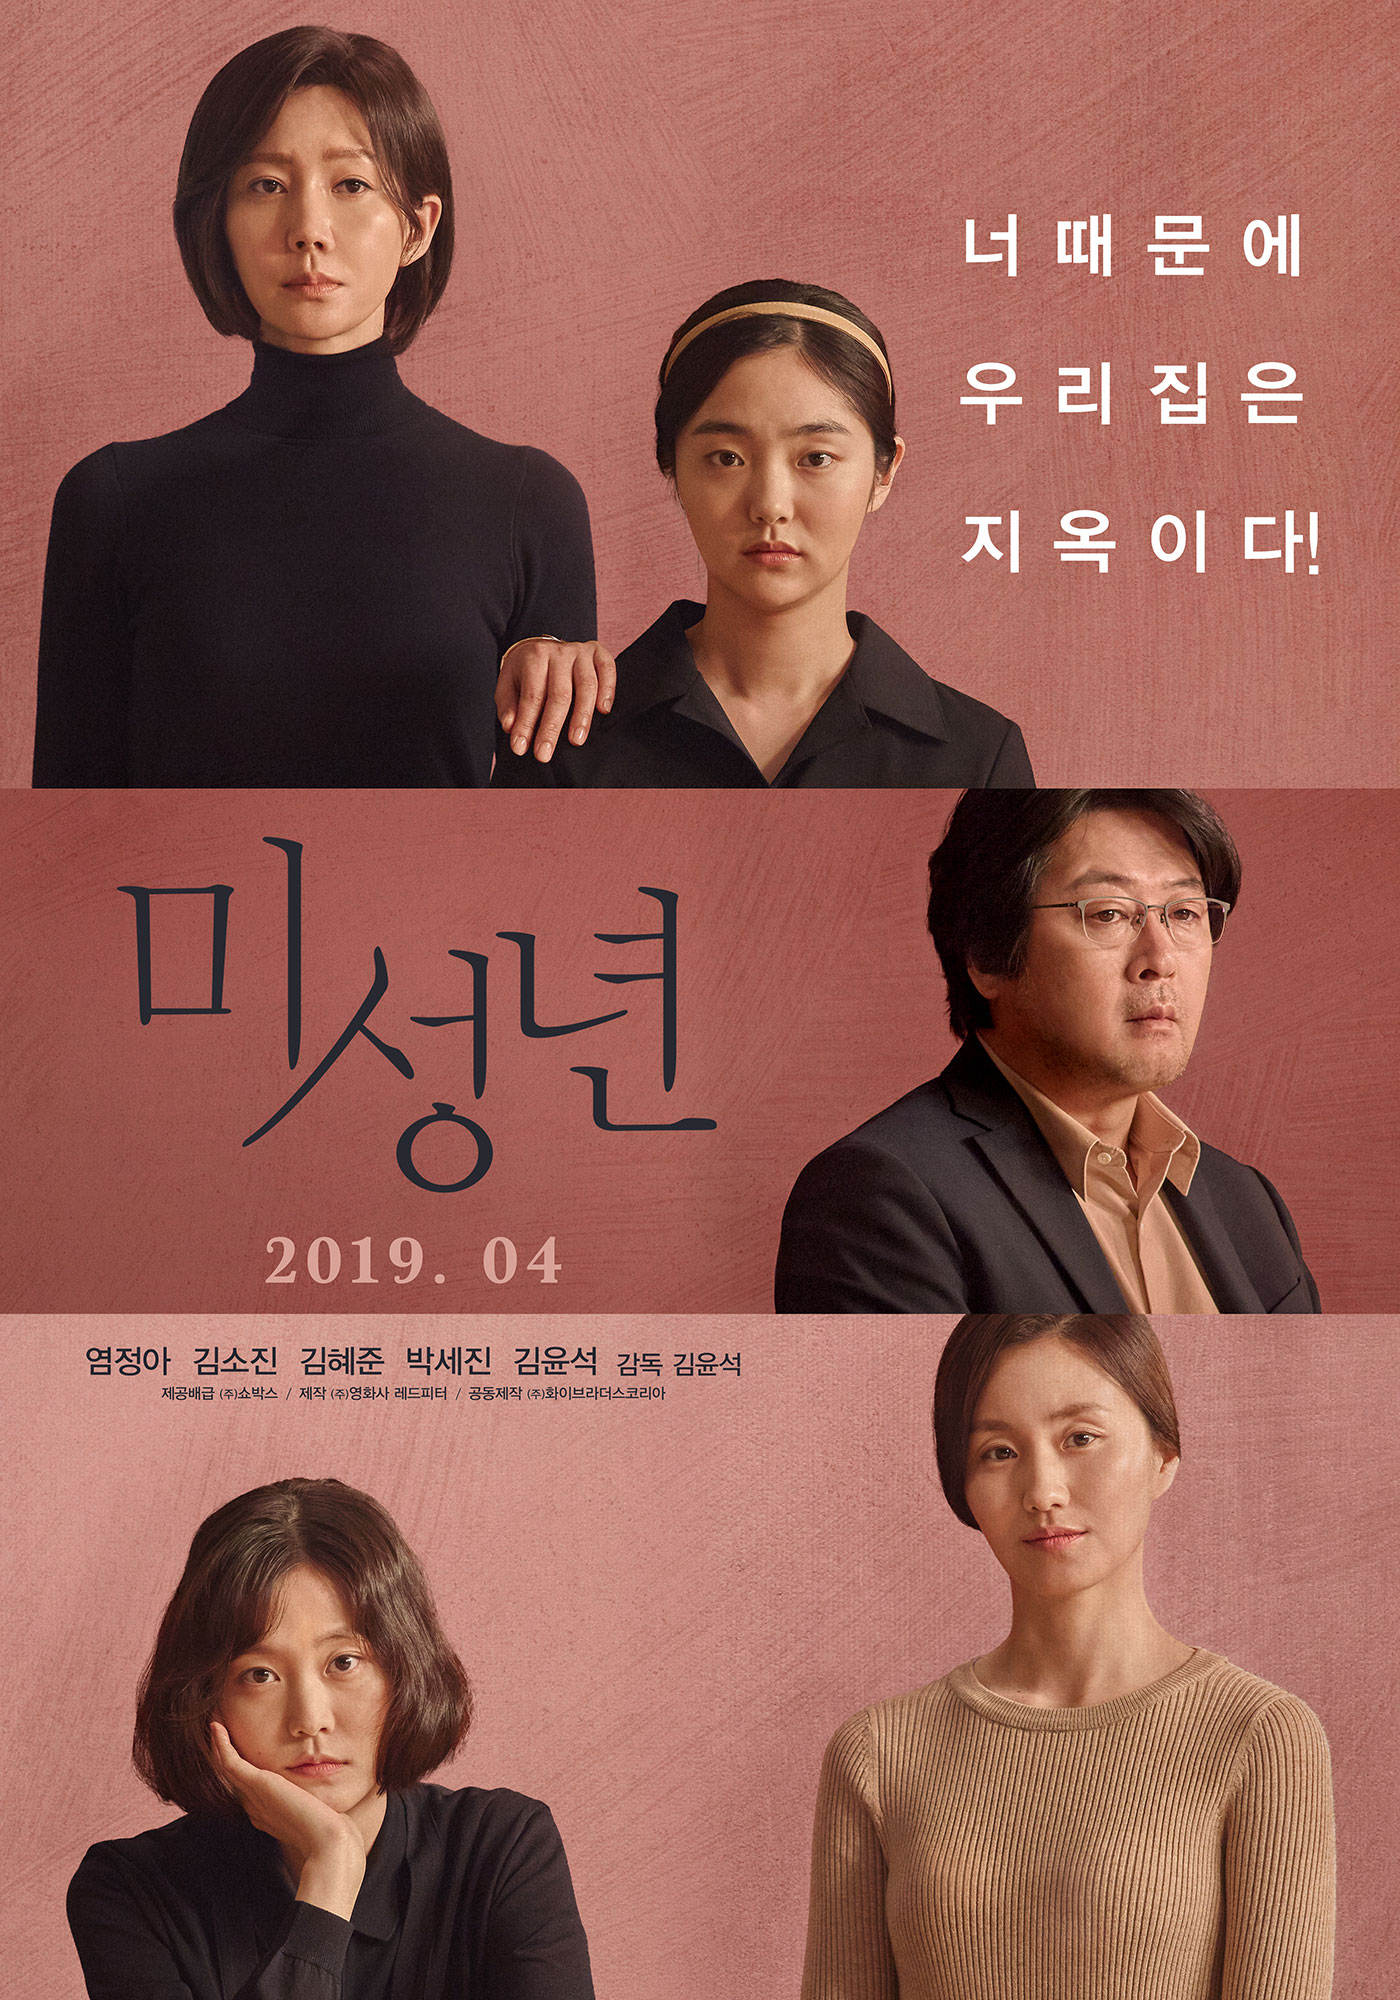 Main trailer and posters for movie "Another Child ...